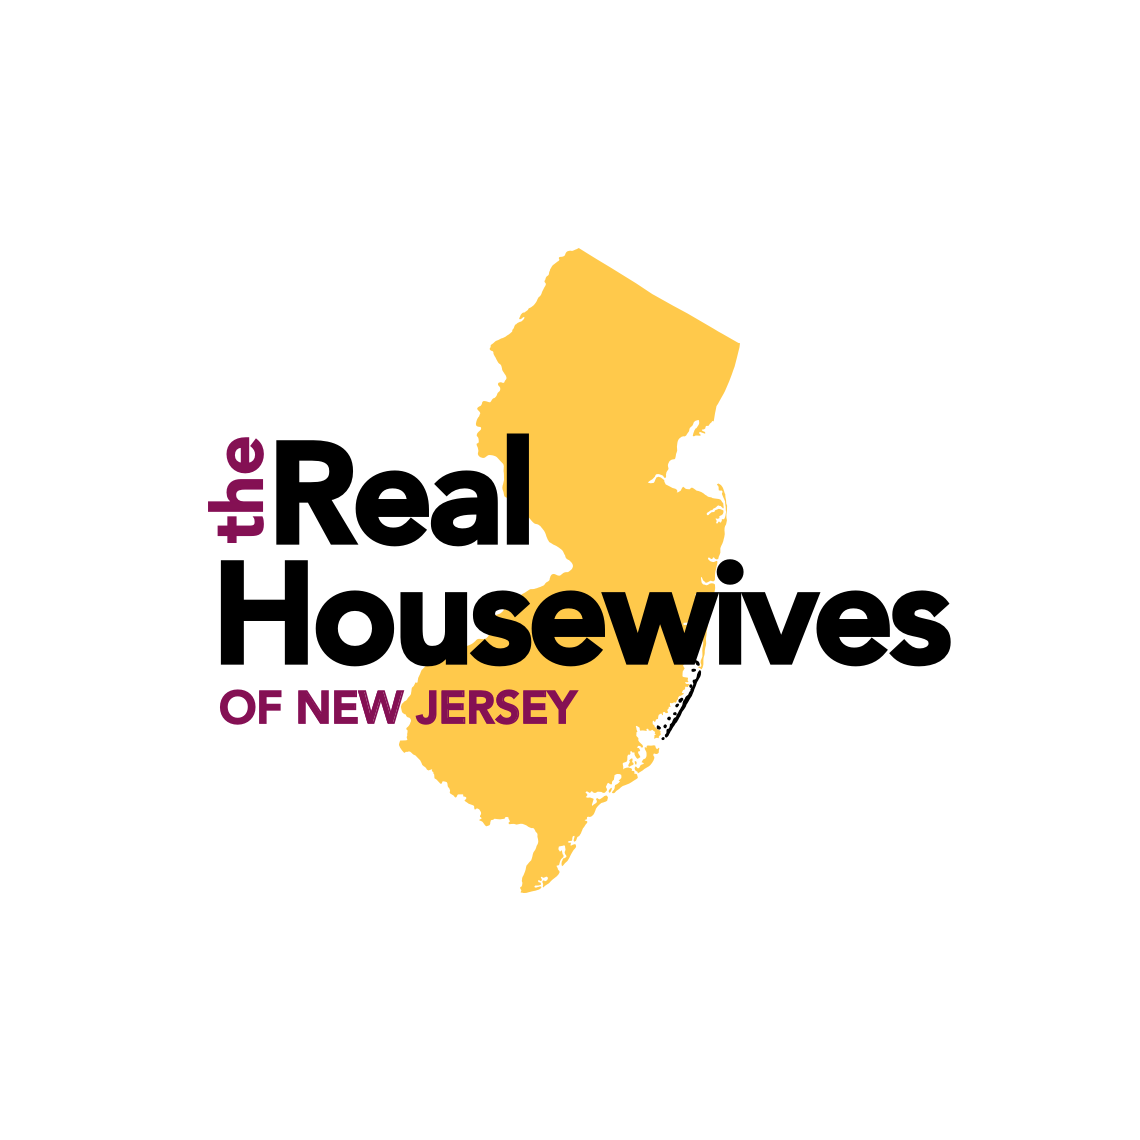 The Real Housewives of New Jersey - What has happened so far?